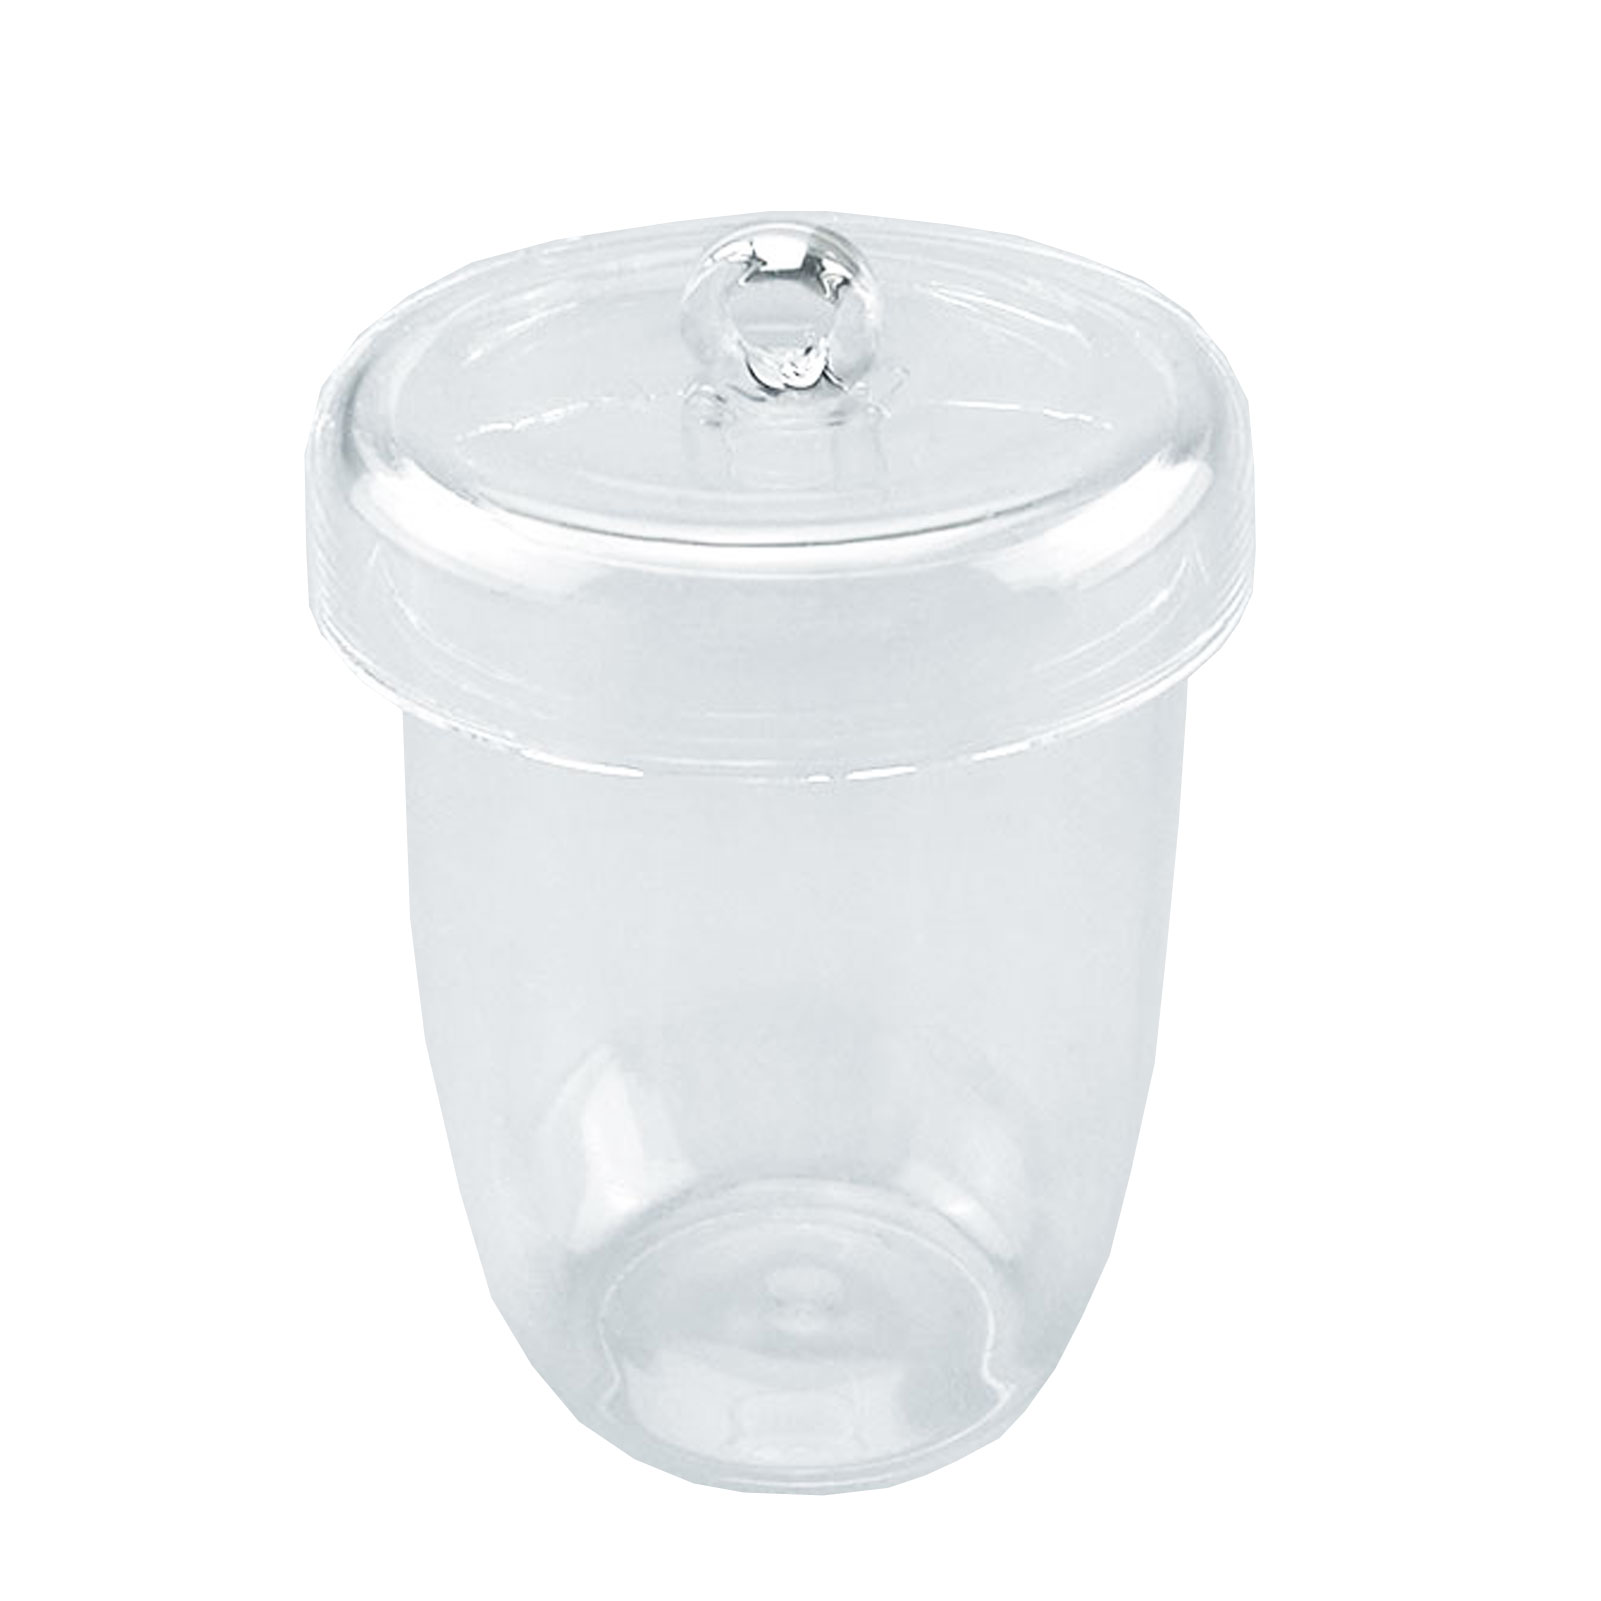 ADAMAS BETA Lab Quartz Crucible with Cover 5-150ml for Laboratory Solvent Eevaporation/Crystallization Experiments